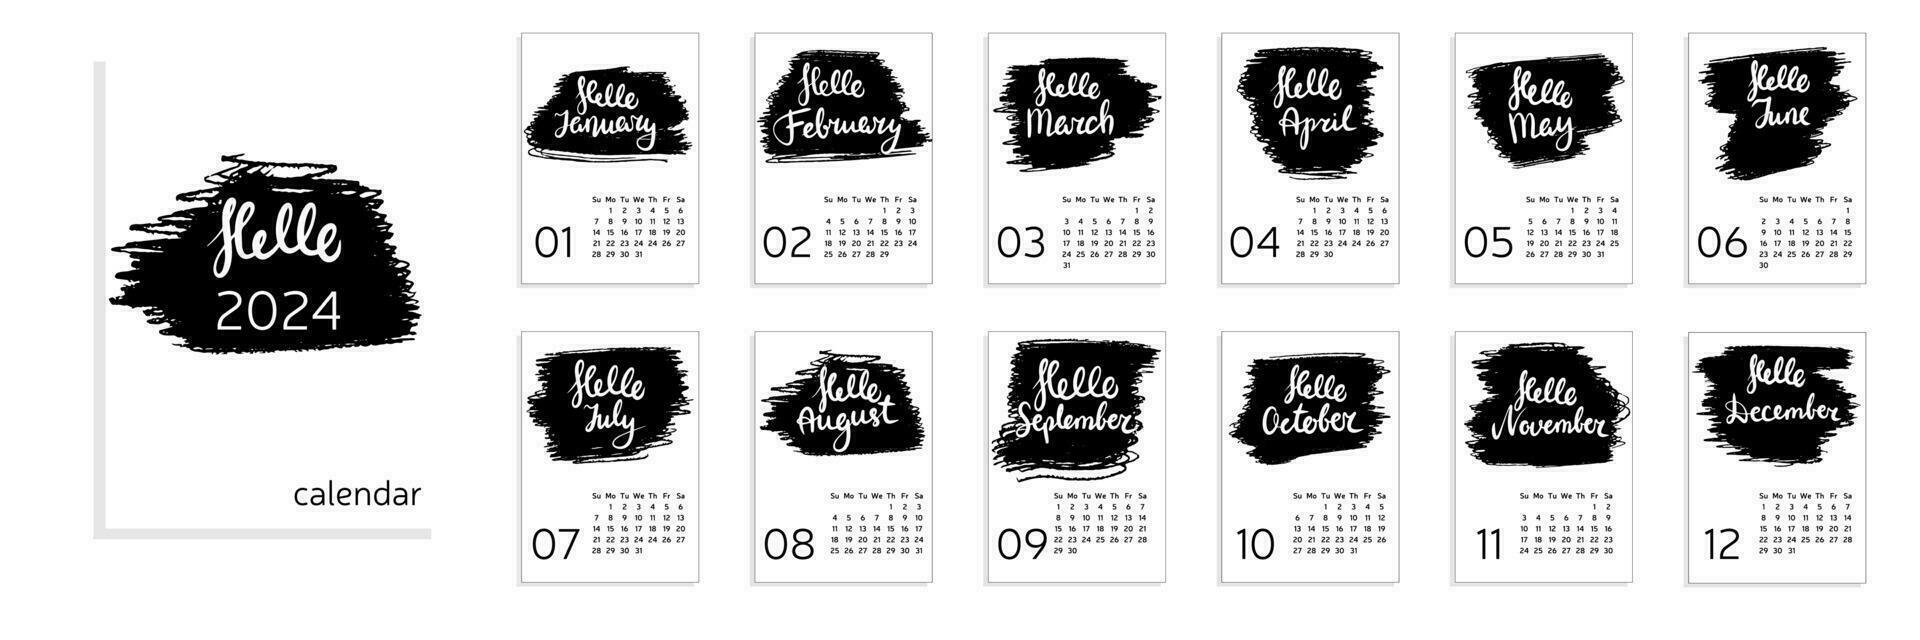 Calendar Hello 2024 year A4. Week start with Sunday. Hello January. Hello February, March, April, May, June, July, August, September, November, October, December. Vector illustration in black color.